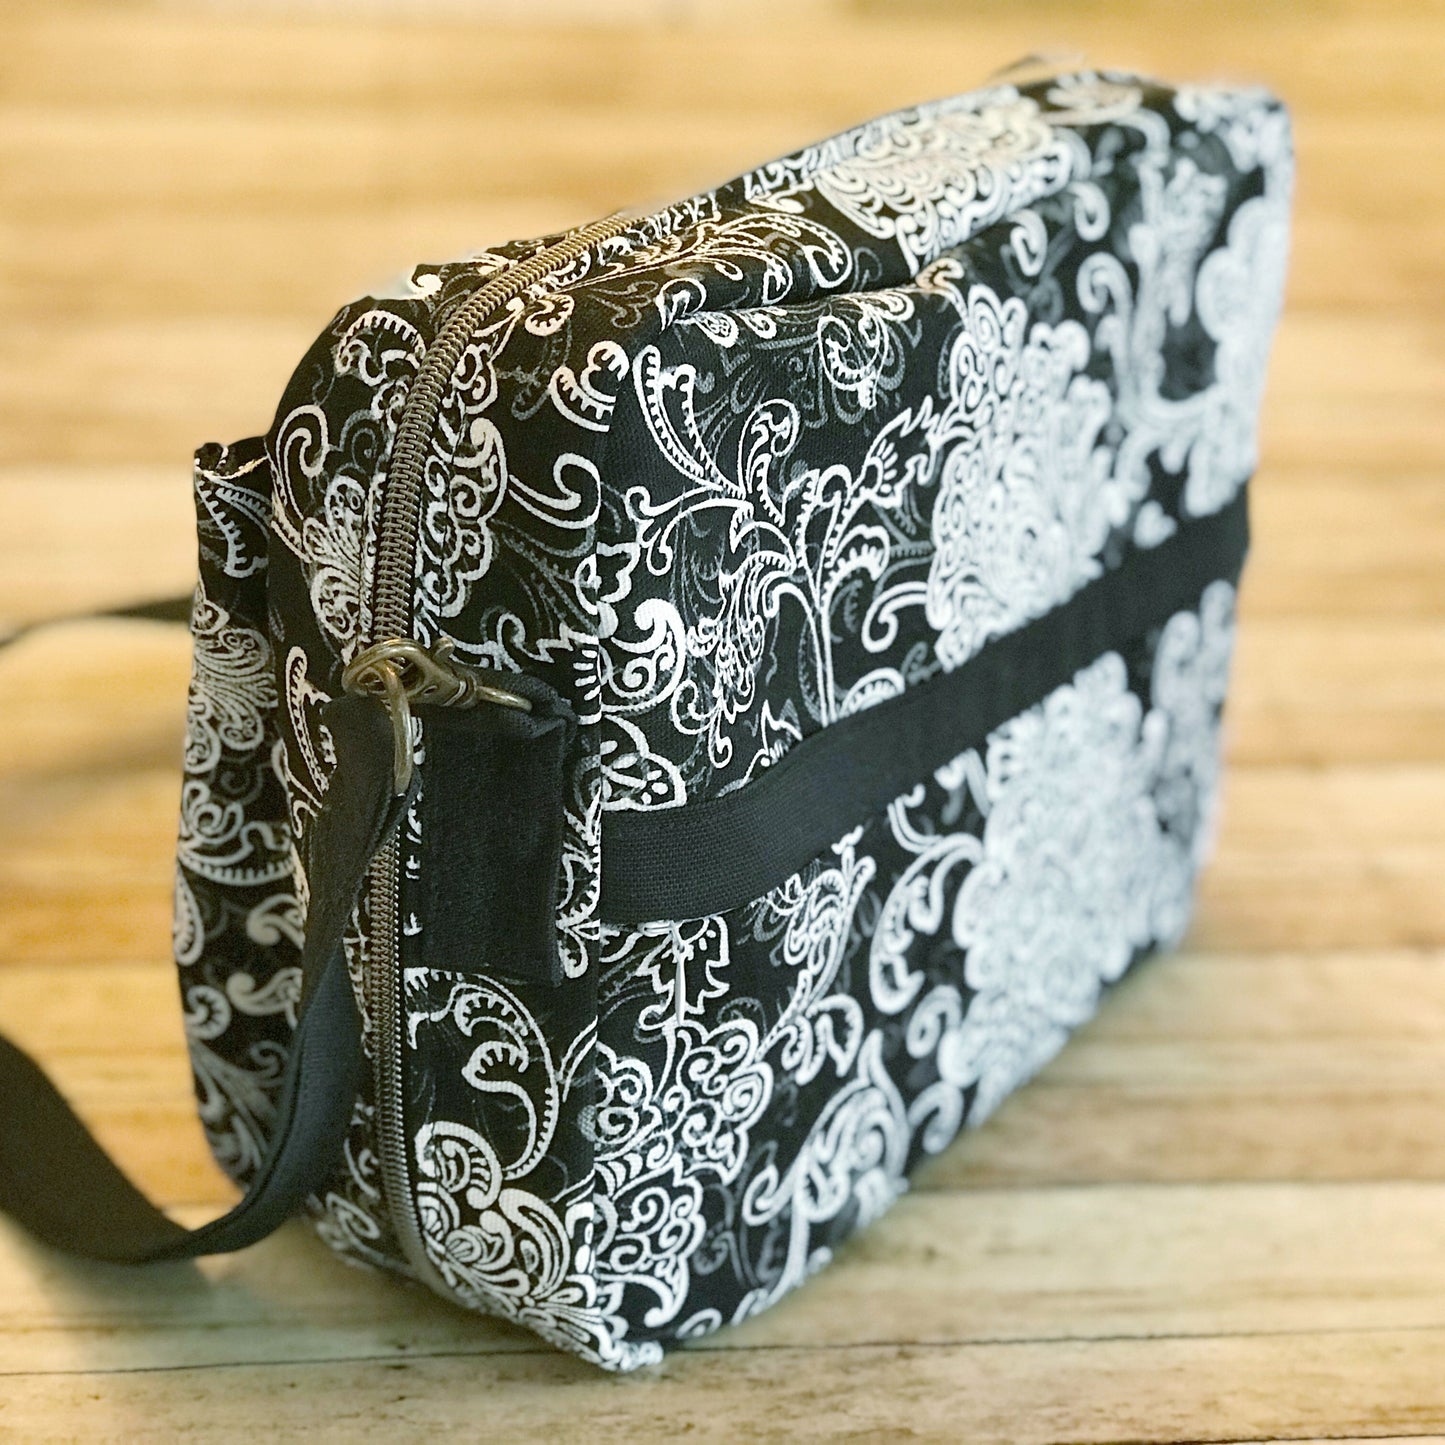 back view of black and charcoal bible bag